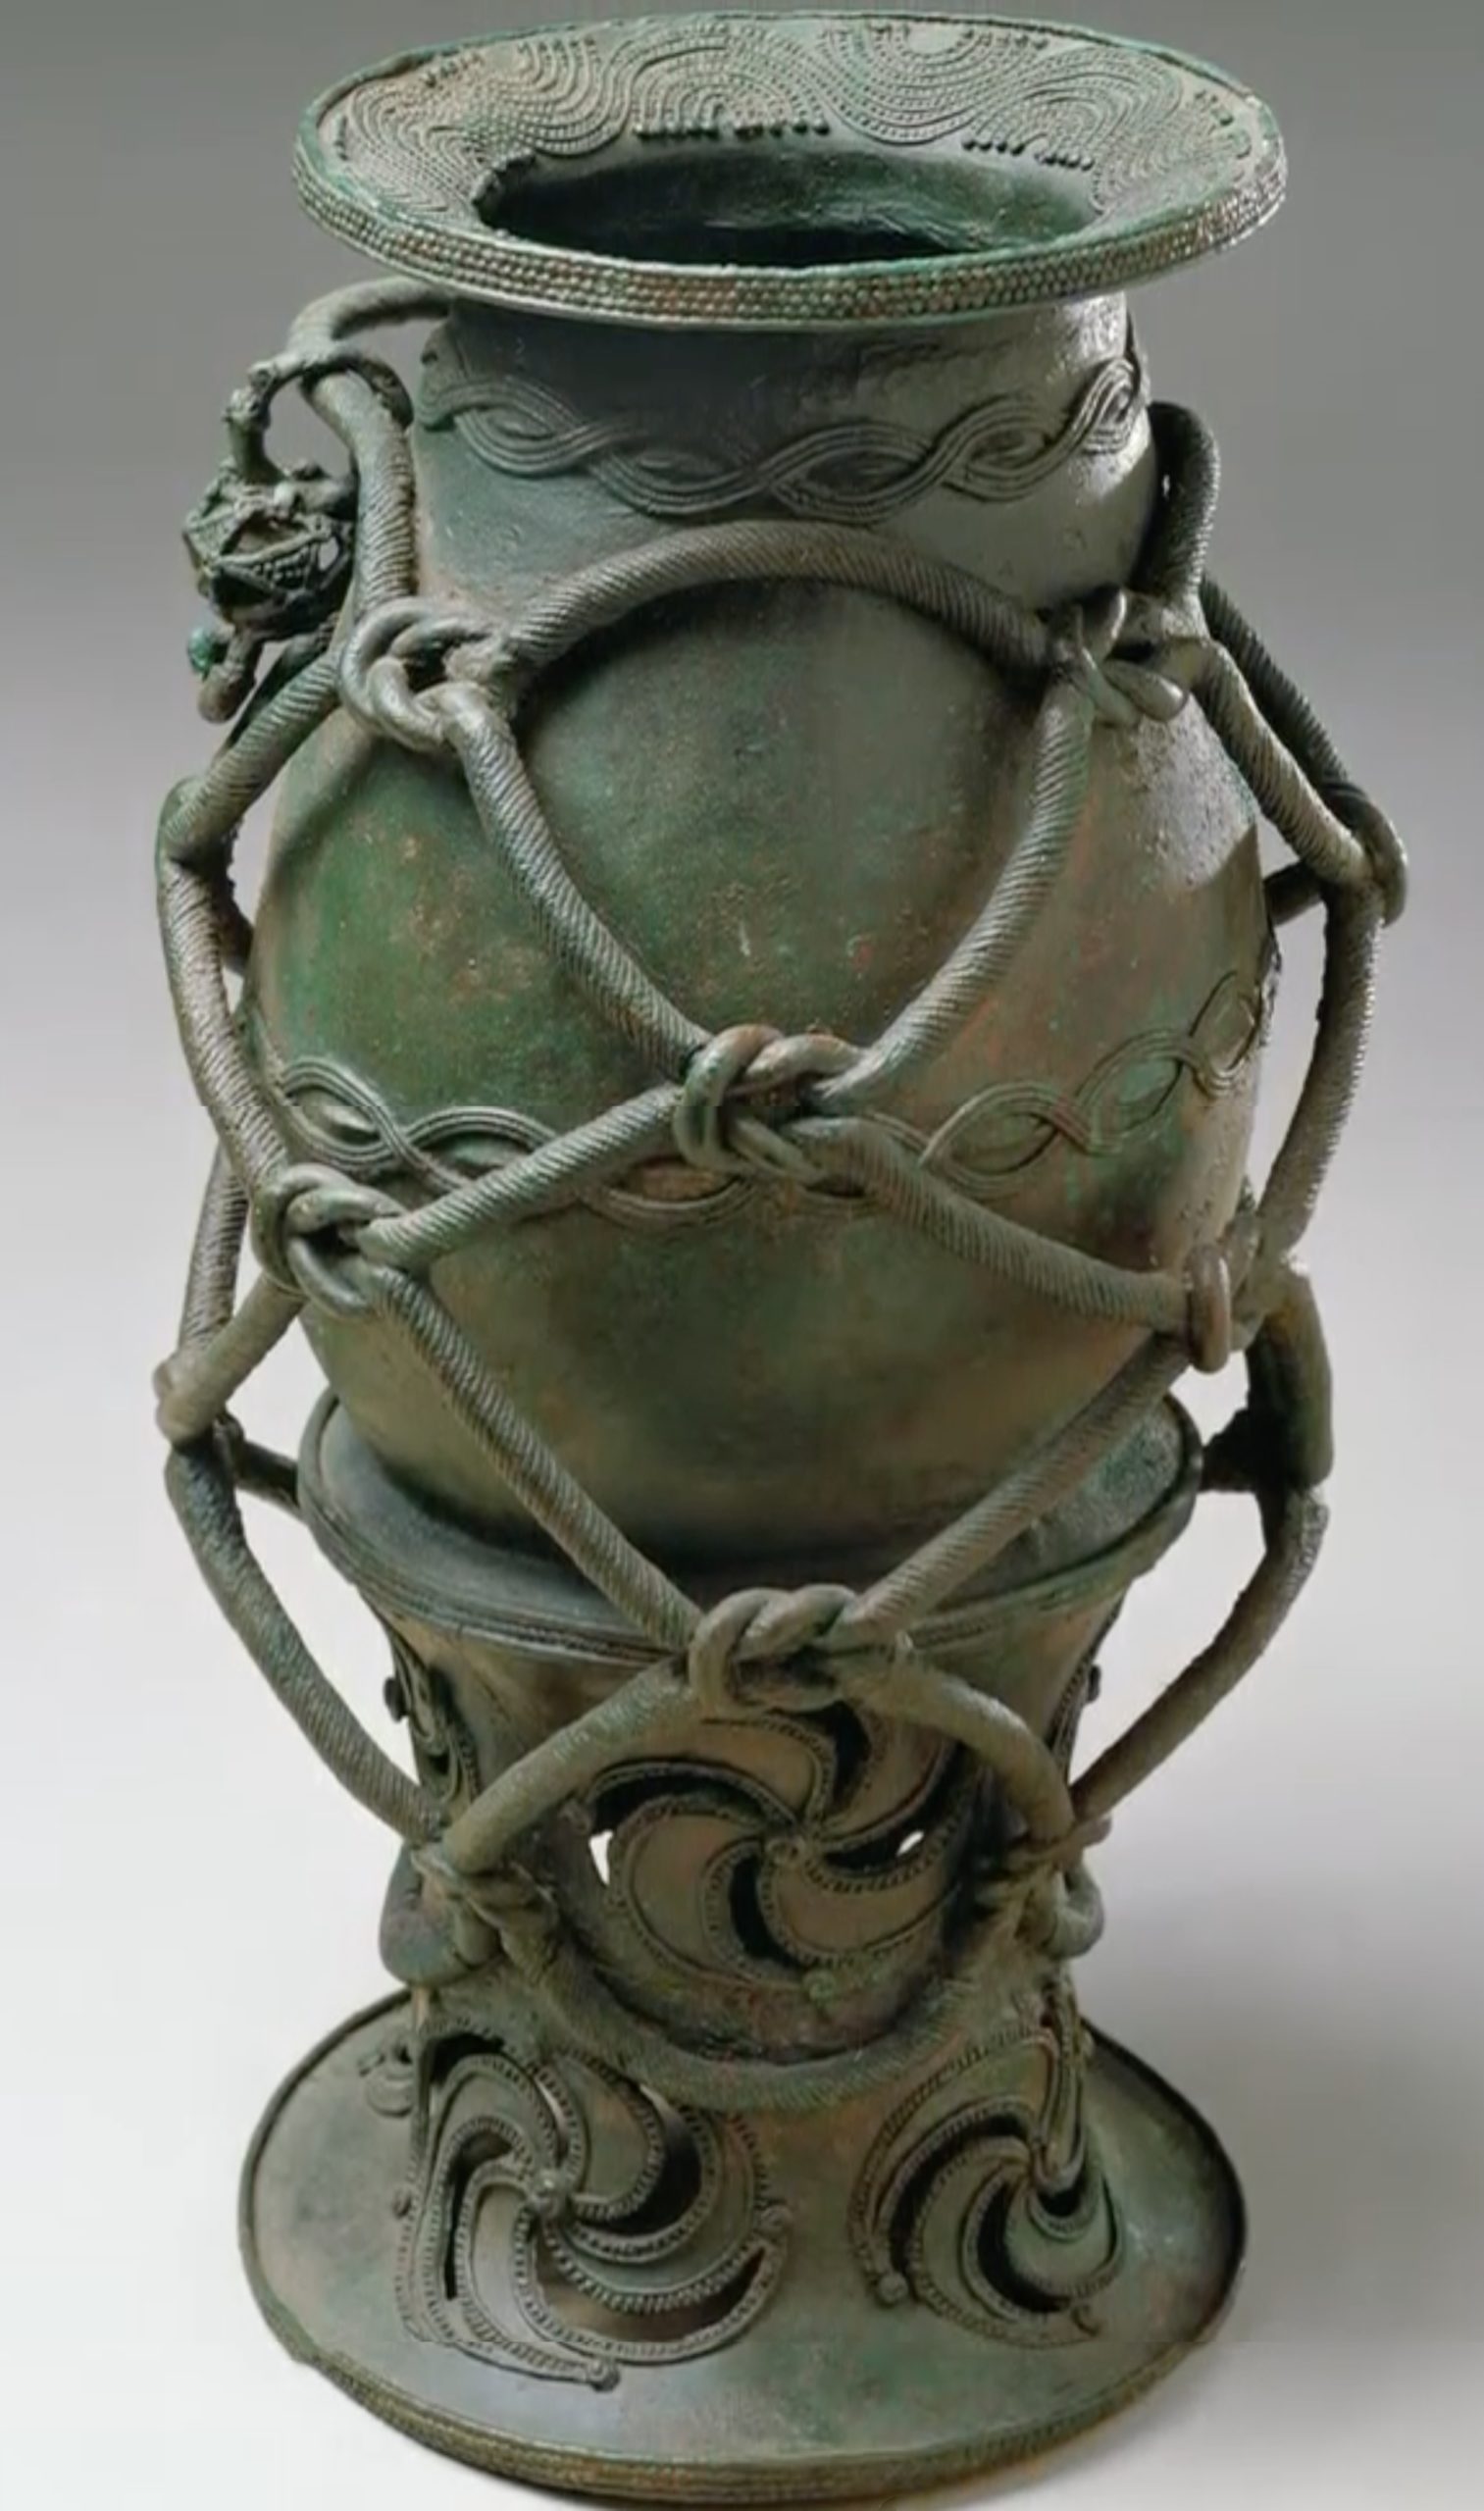 Vase with Rope from Igbo-Ukwu, Nigeria, c. 9th–11th century C.E., leaded bronze, 12 11/16 inches (National Museum, Lagos)